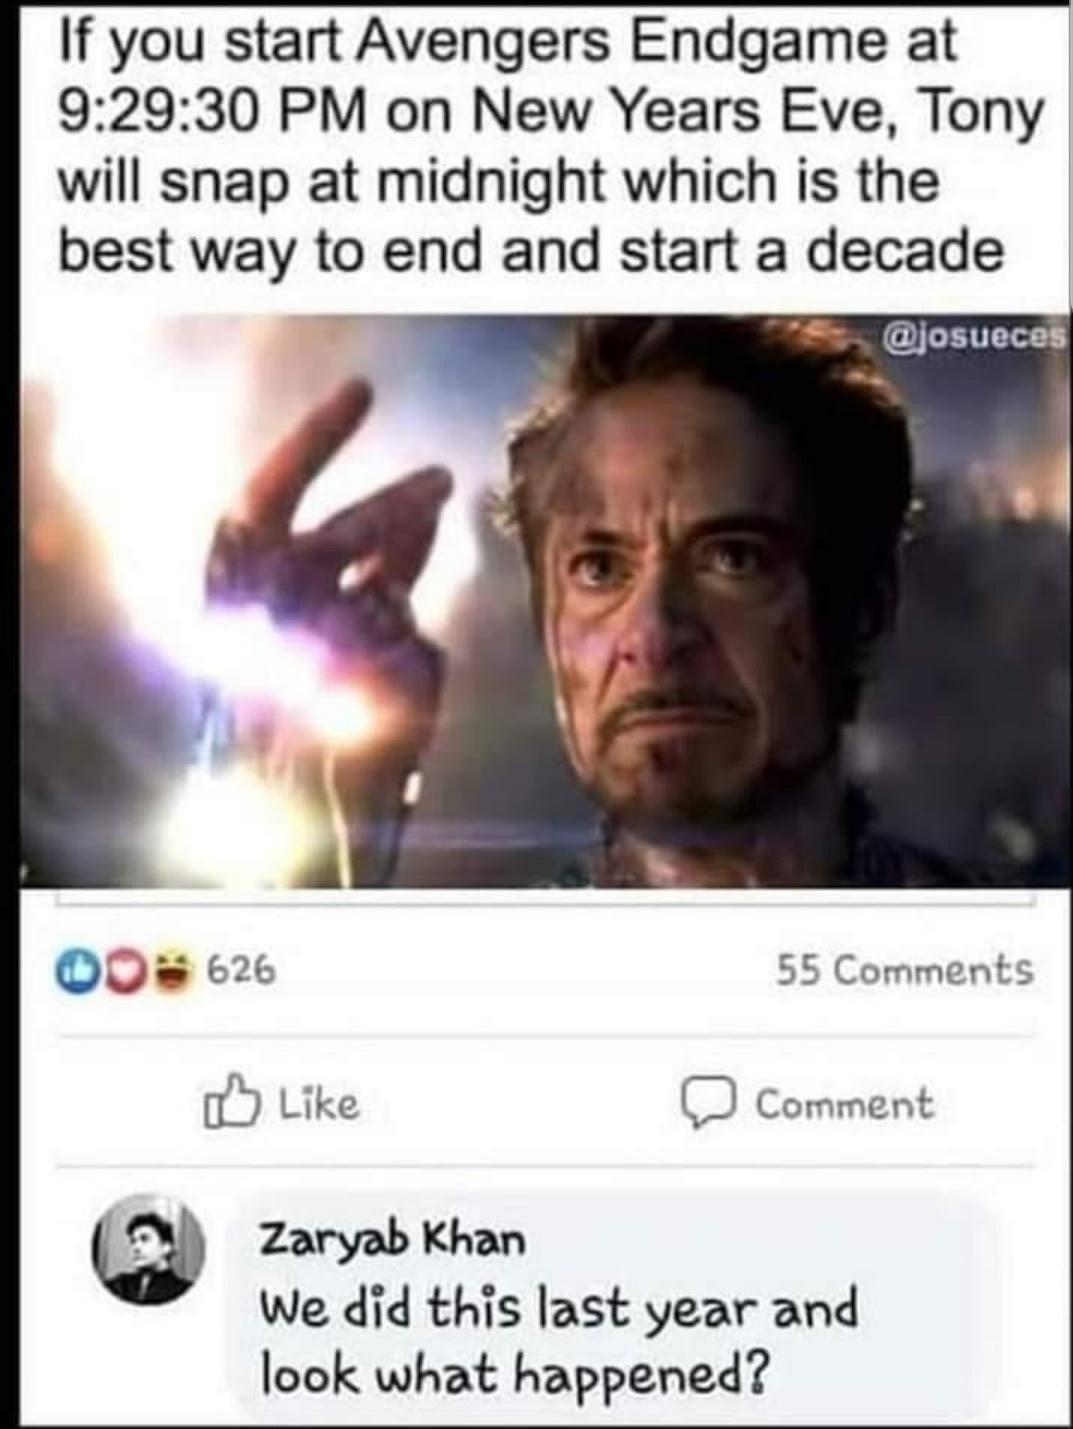 try something new - If you start Avengers Endgame at 30 Pm on New Years Eve, Tony will snap at midnight which is the best way to end and start a decade 626 55 Comment Zaryab Khan We did this last year and look what happened?